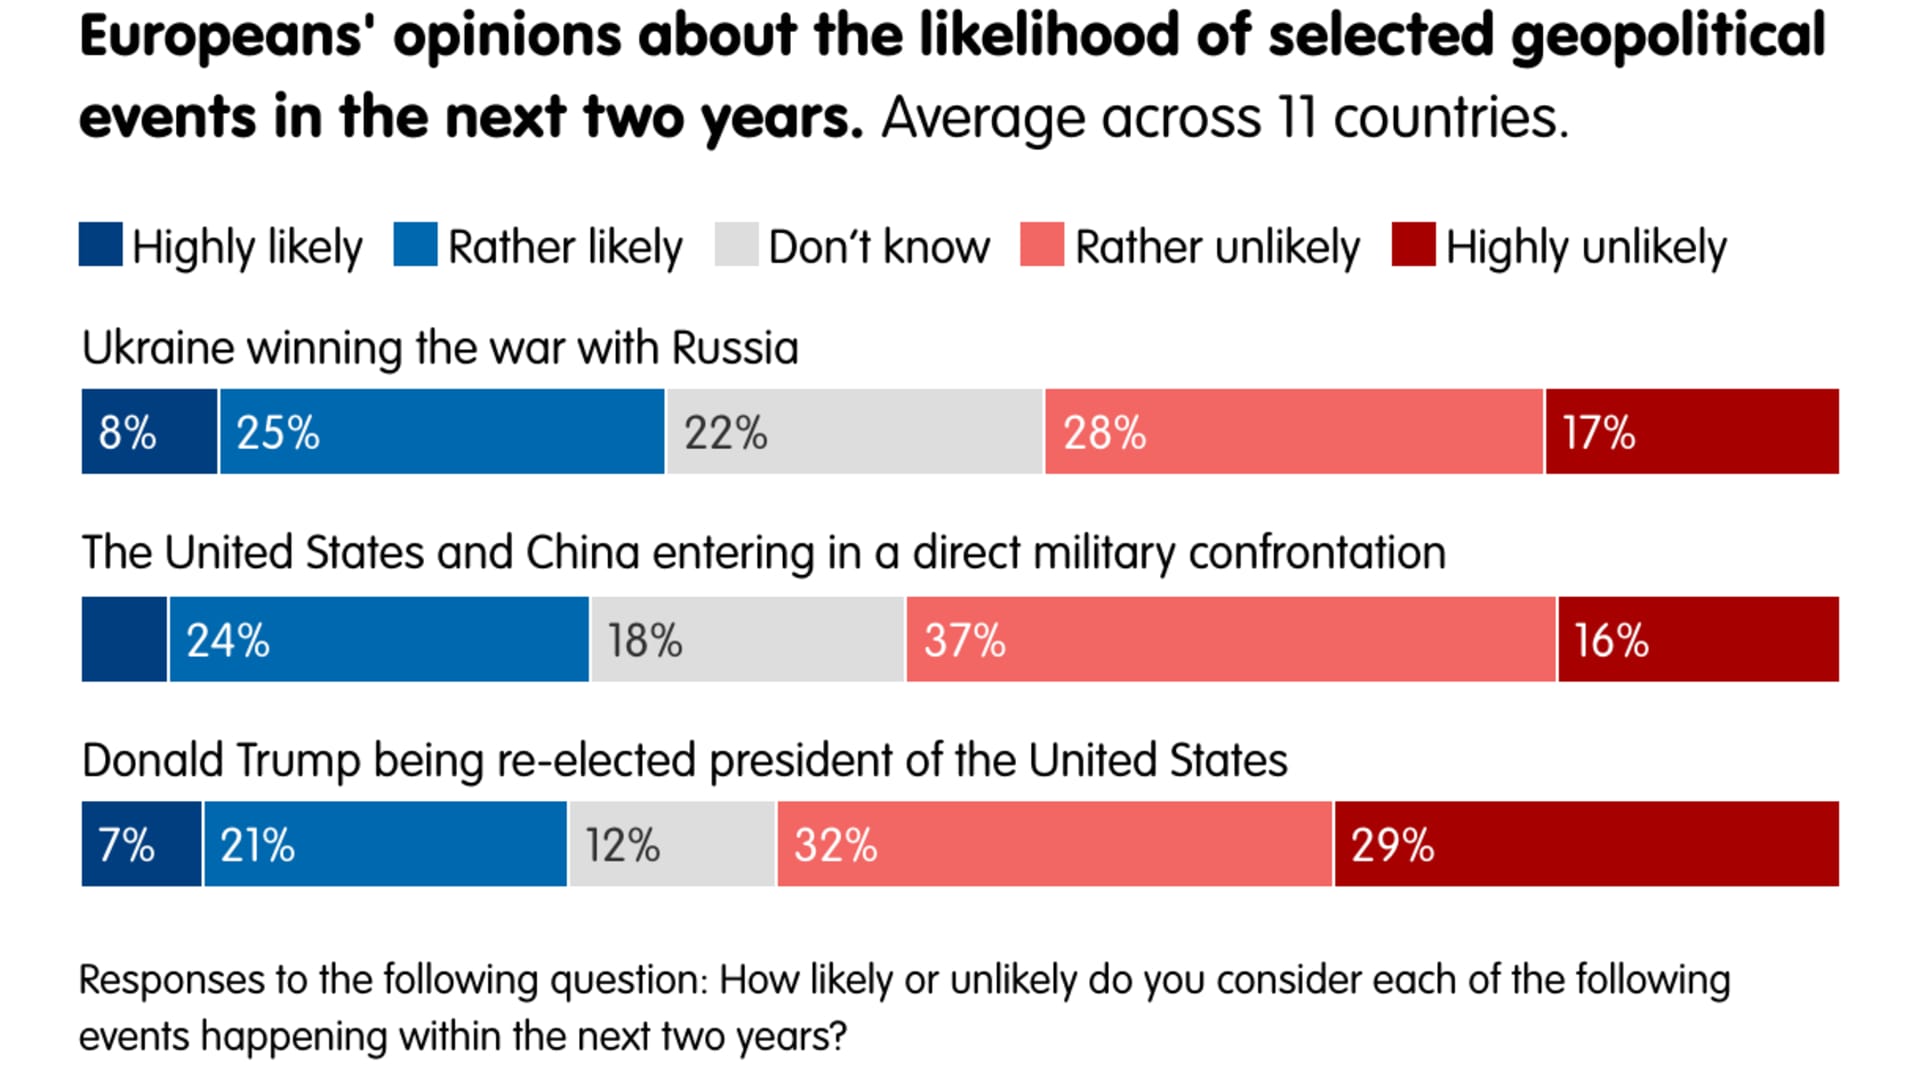 Europeans' opinions about the likelihood of selected geopolitical events in the next two years.